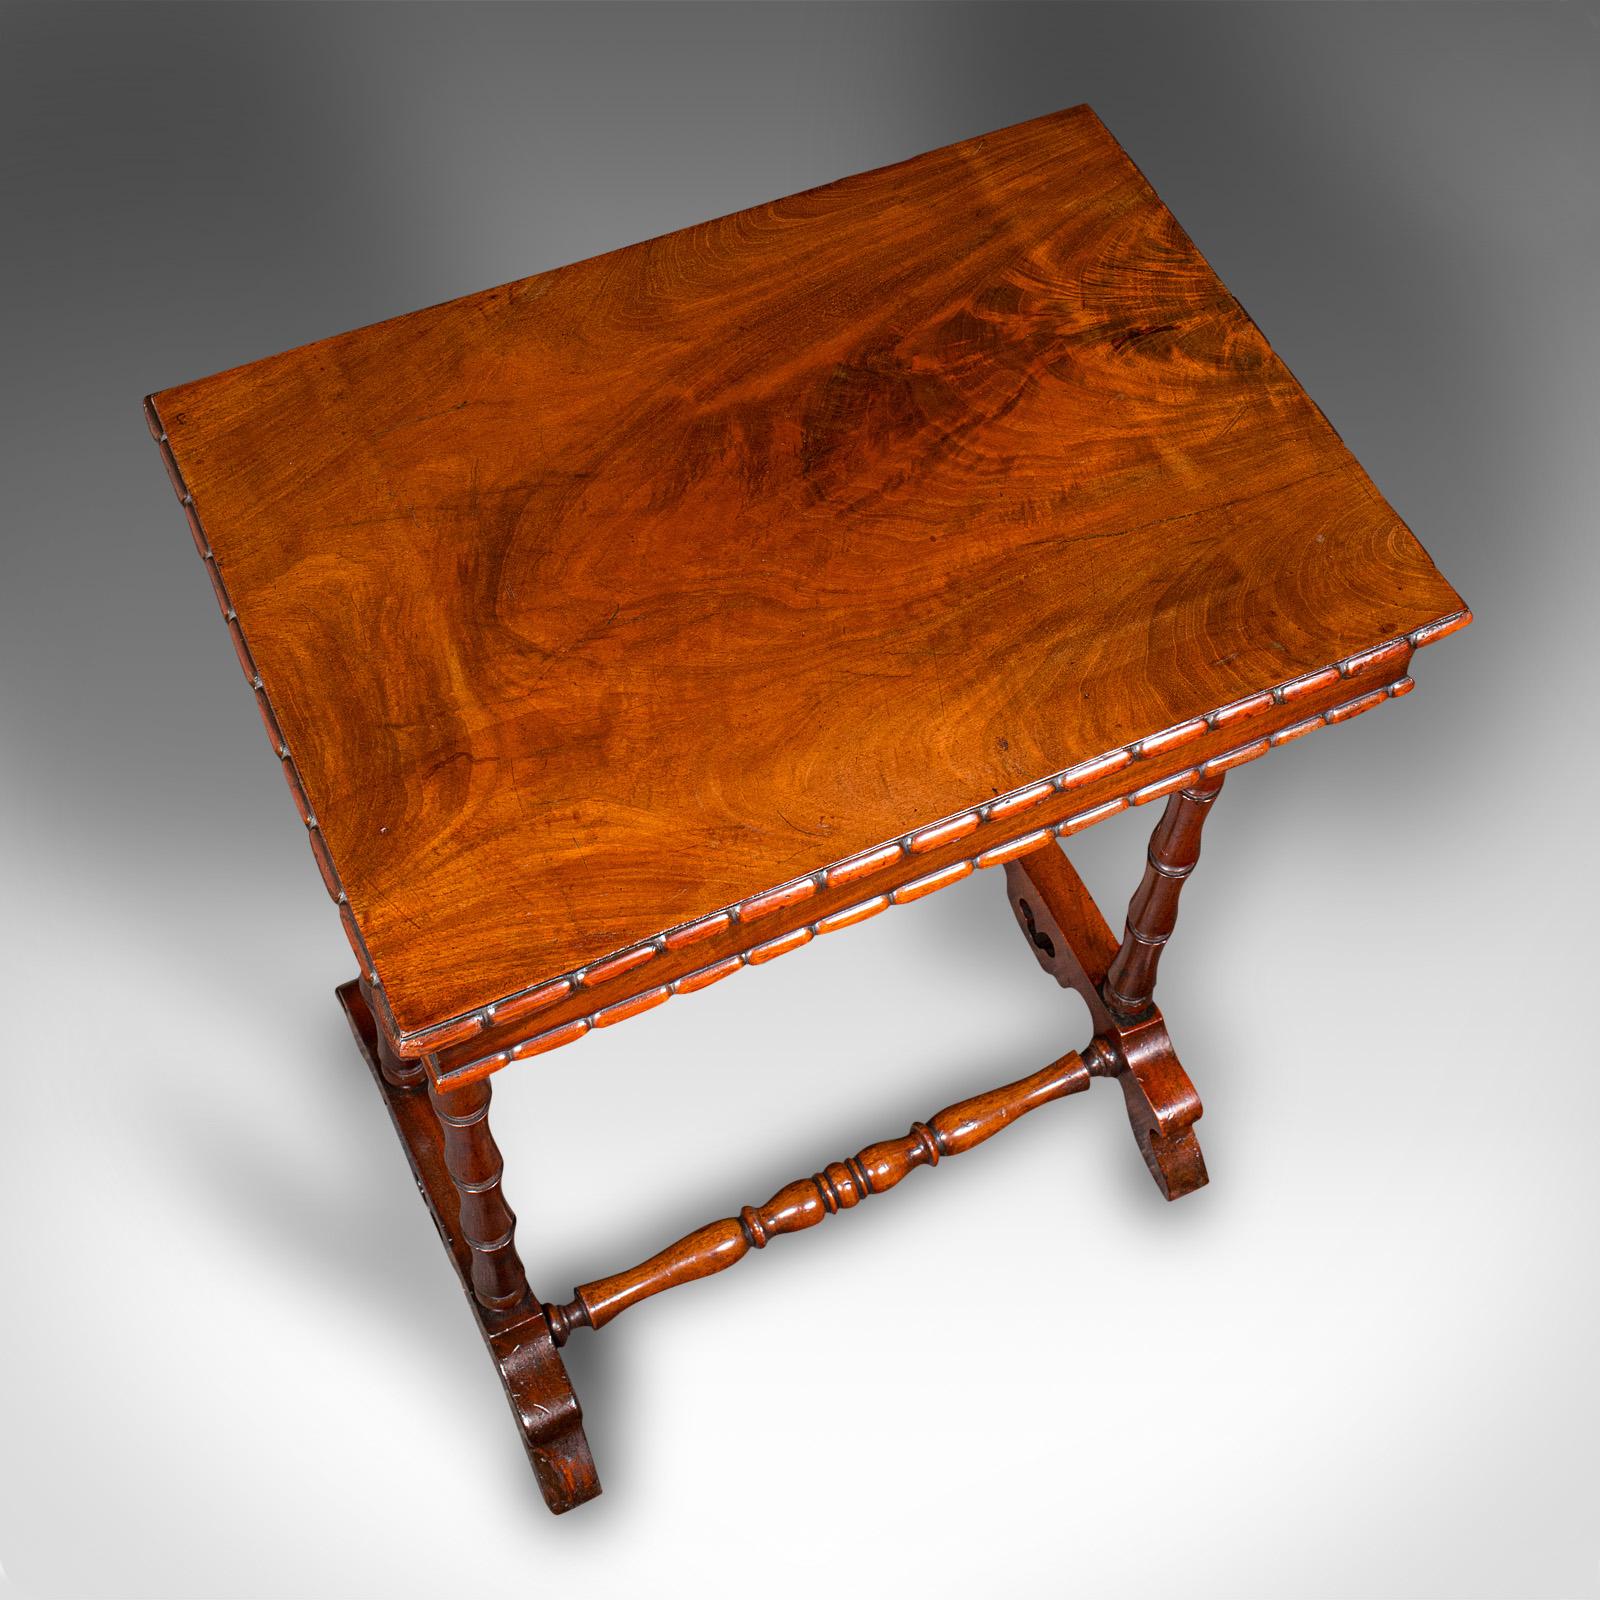 19th Century Small Antique Sewing Table, English, Flame, Ladies, Work, Regency, Circa 1830 For Sale